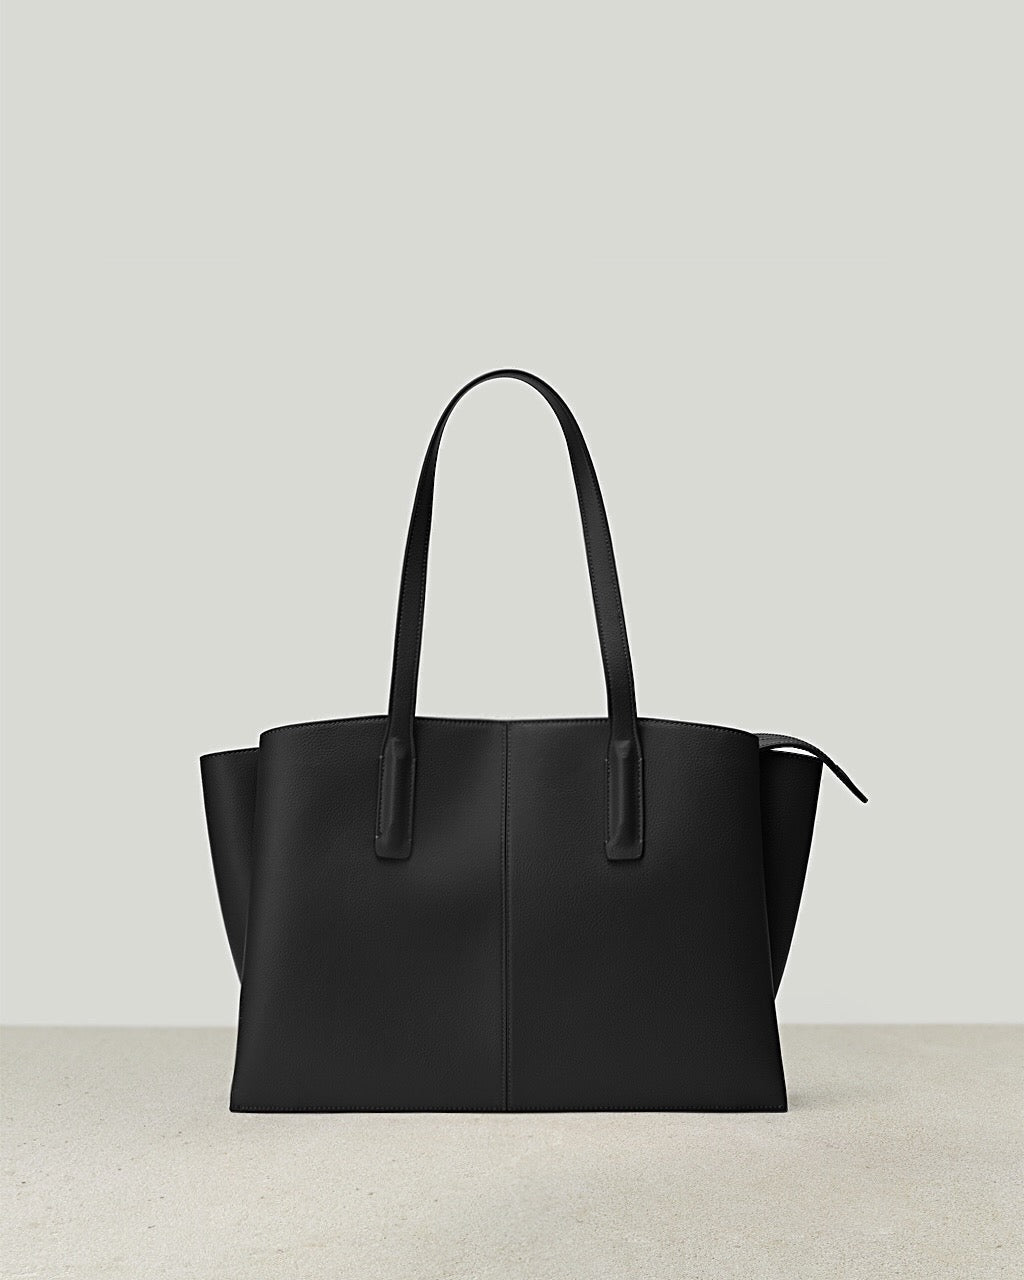 Freja New York - The Linnea tote, a bag we designed from... | Facebook